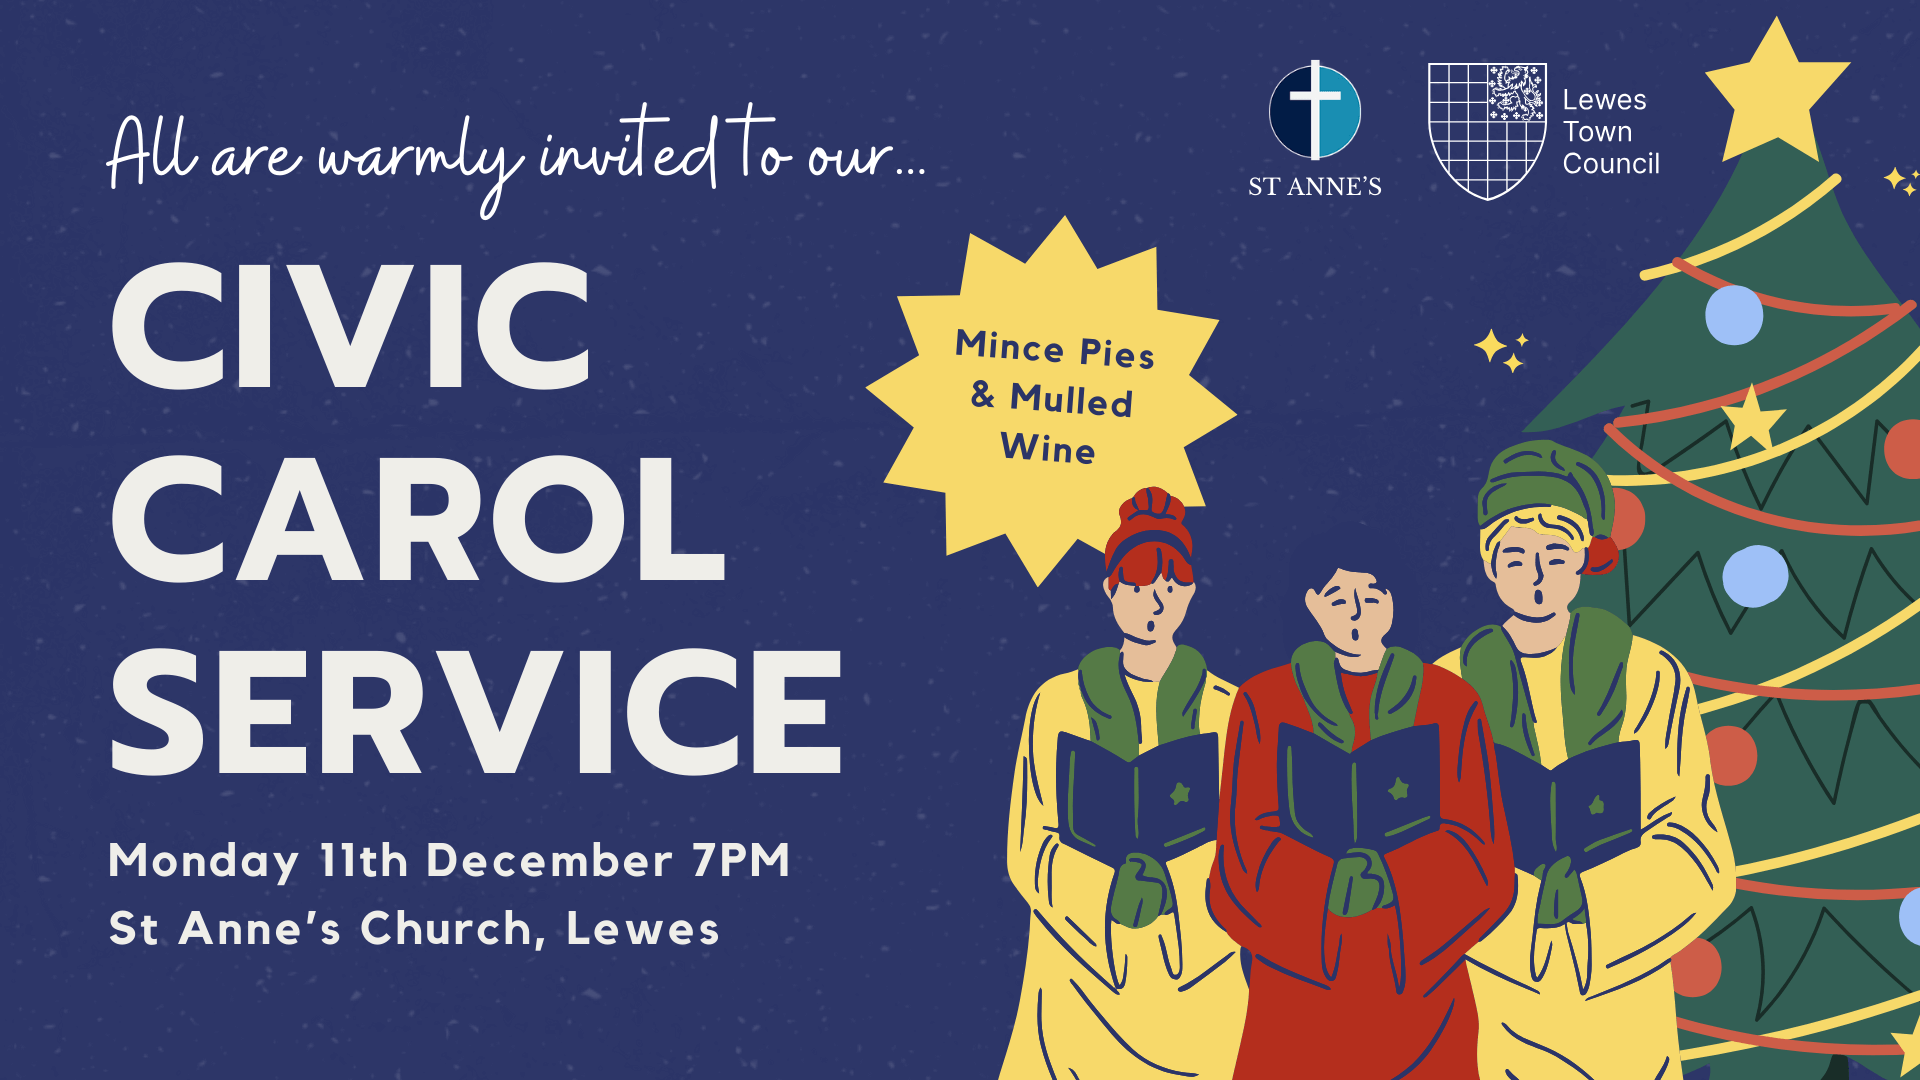 All are warmly invited to our Civic Carol Service. Monday 11th December at 7pm. St Anne's Church, Lewes. Mince Pies and Mulled Wine.